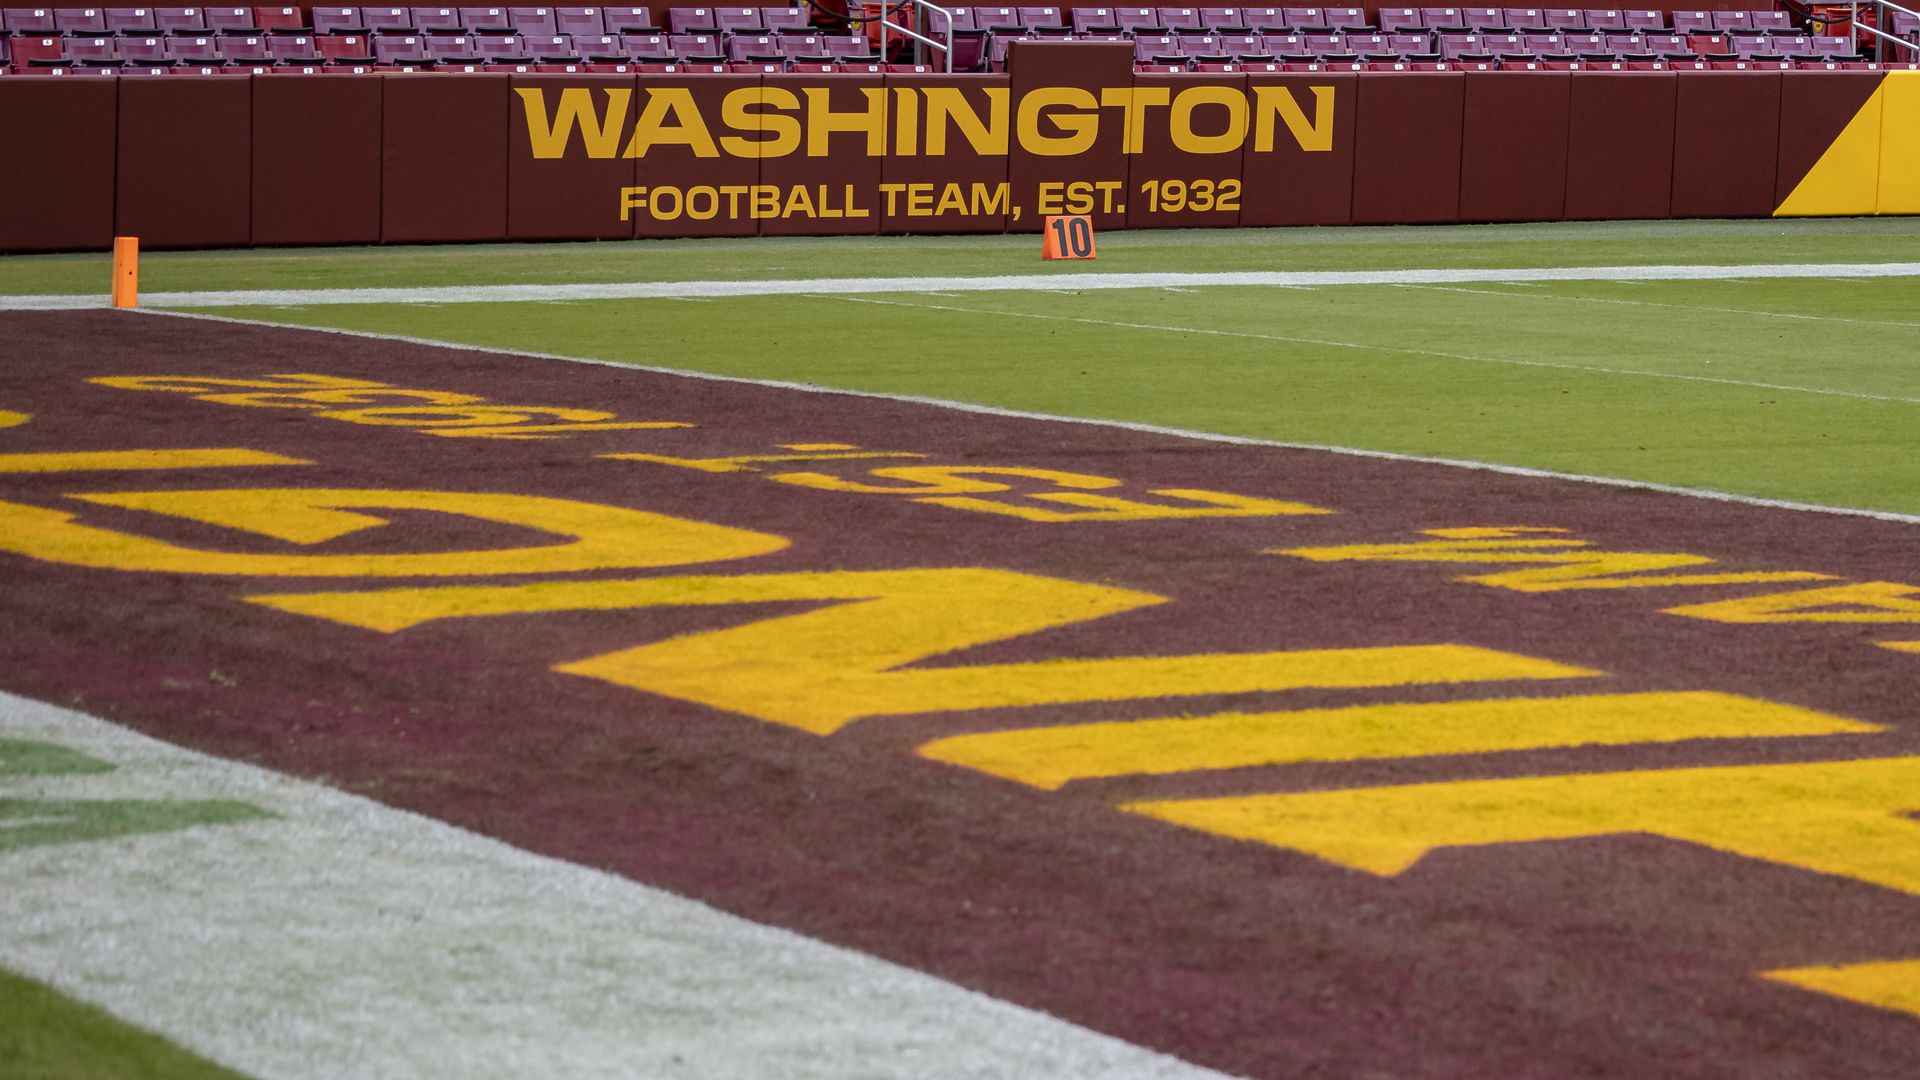 A close-up of a Washington Football Team sign on Fed-Ex field near the end zone.